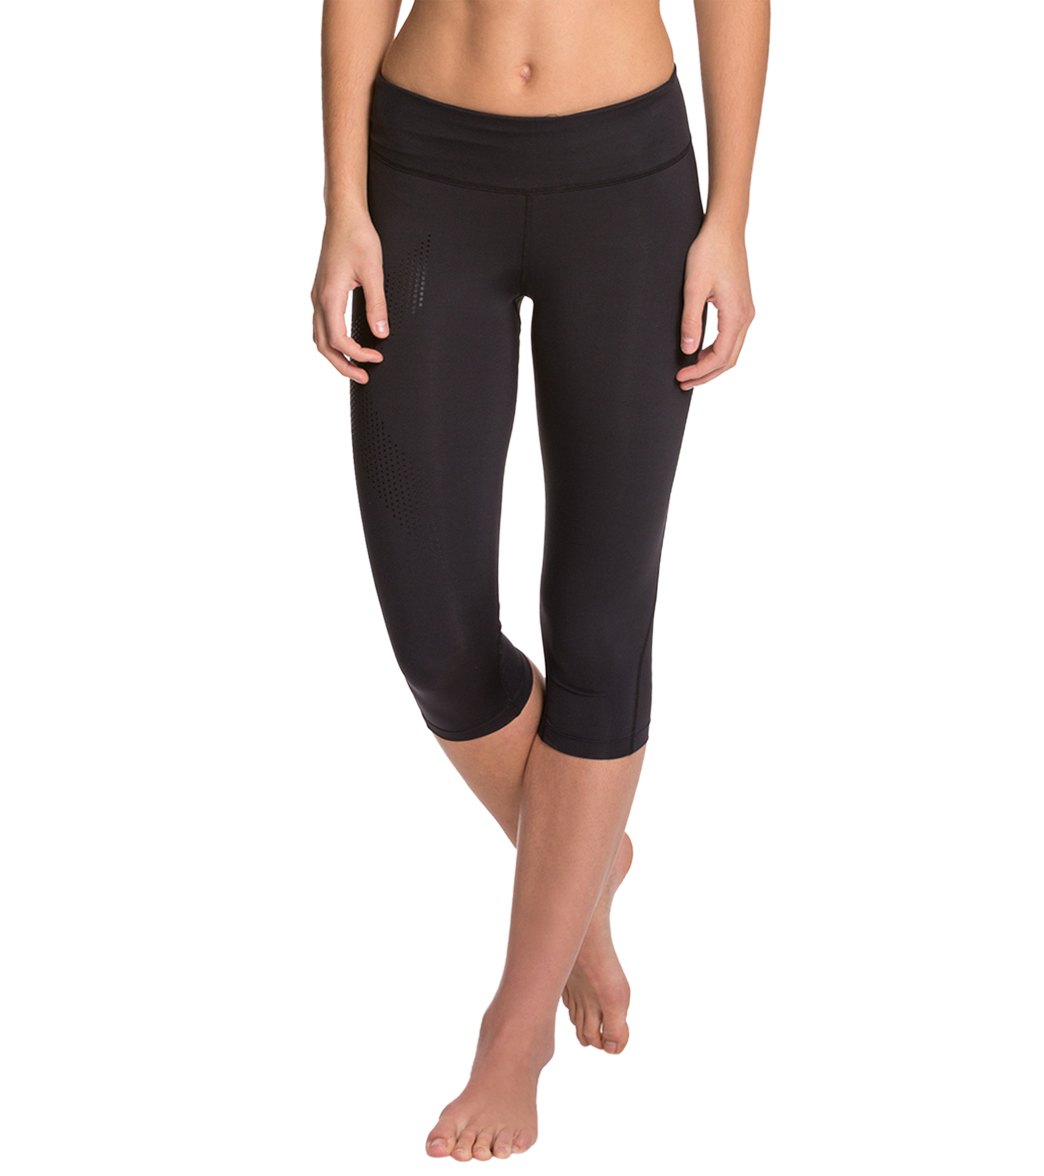 2XU Women's Mid Rise 3/4 Compression Tights at SwimOutlet.com - Free ...